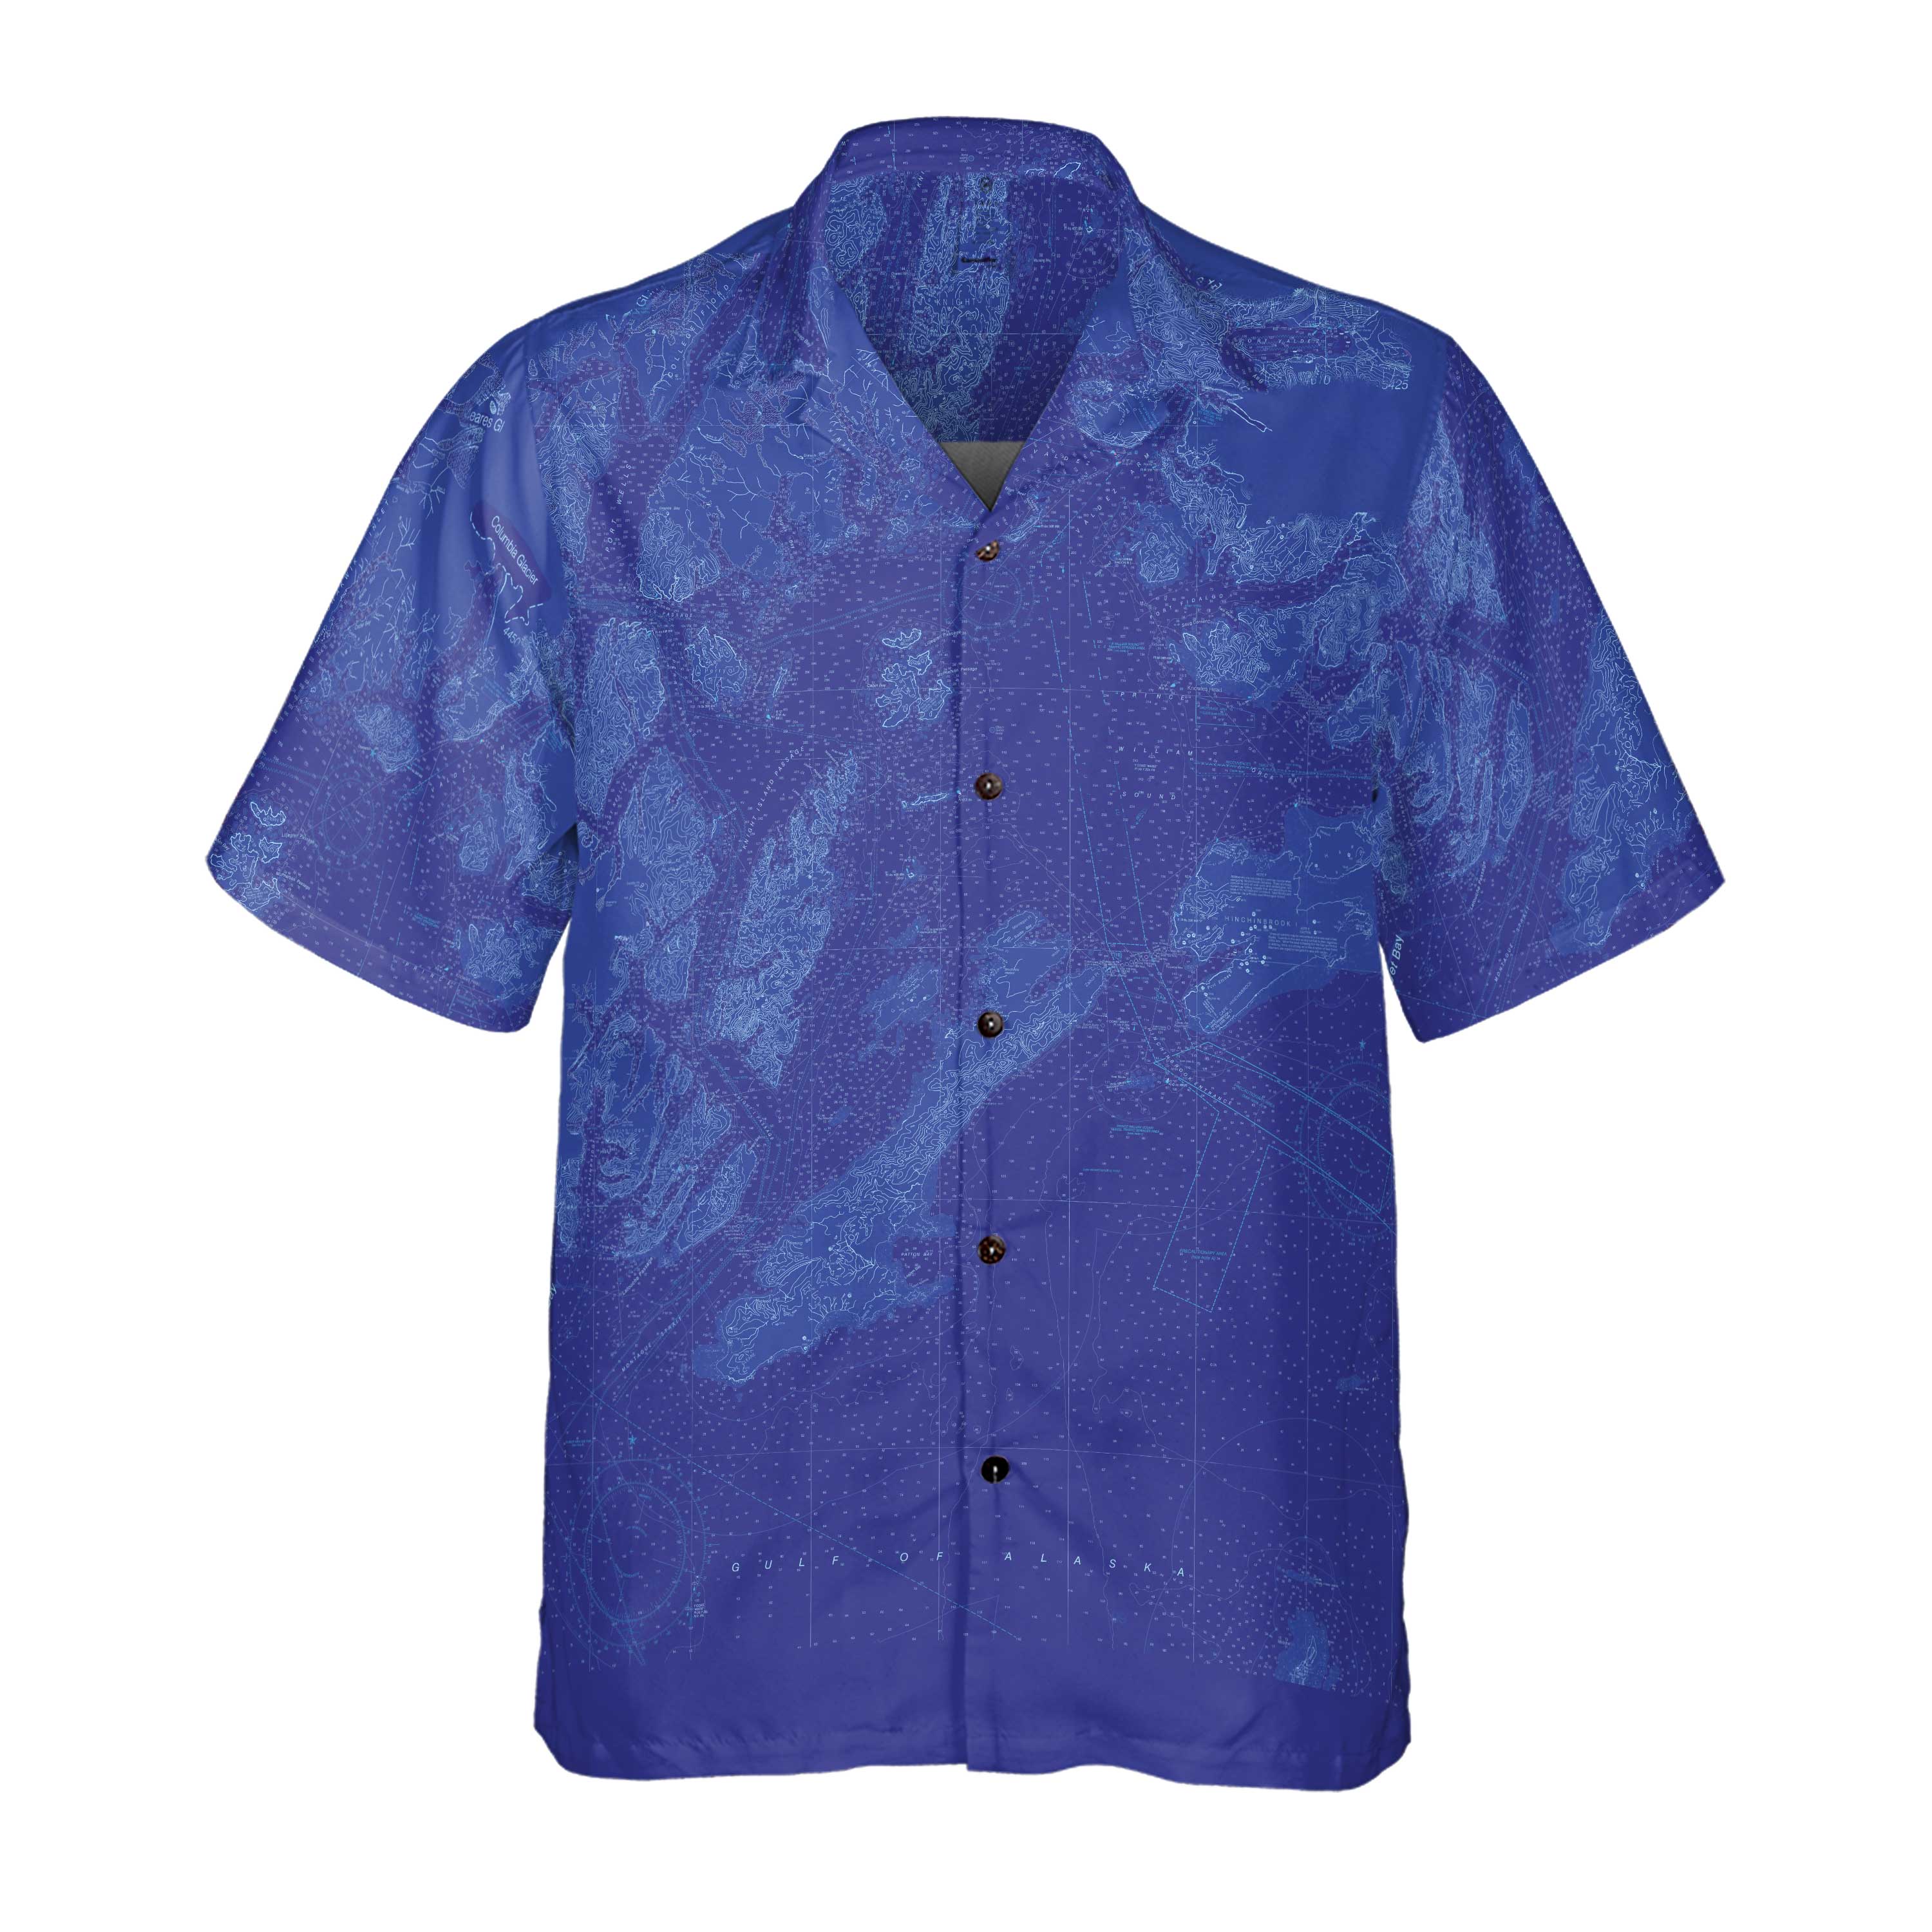 The Prince William Sound Coconut Button Camp Shirt